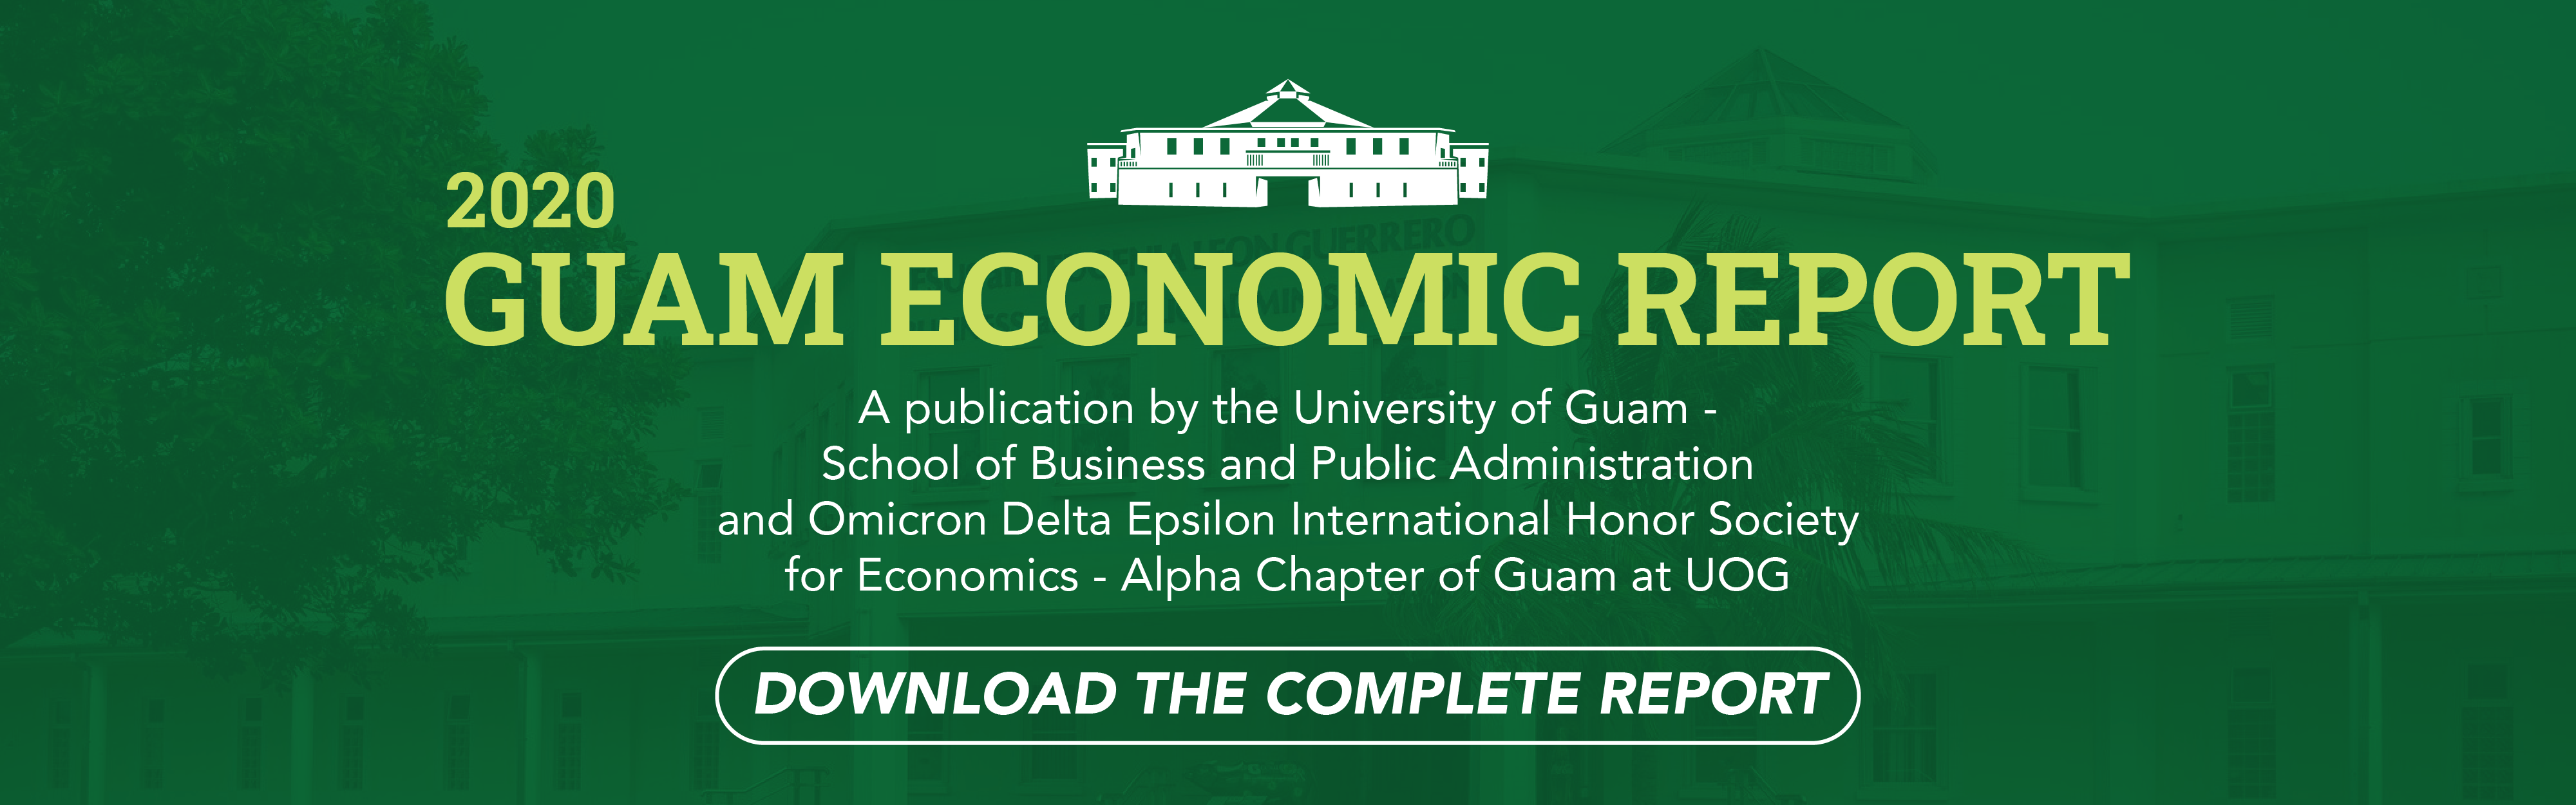  The Guam Economic Report is a publication by the University of Guam - School of Business and Public Administration and Omicron Delta Epsilon International Honor Society for Economics - Alpha Chapter of Guam at UOG.